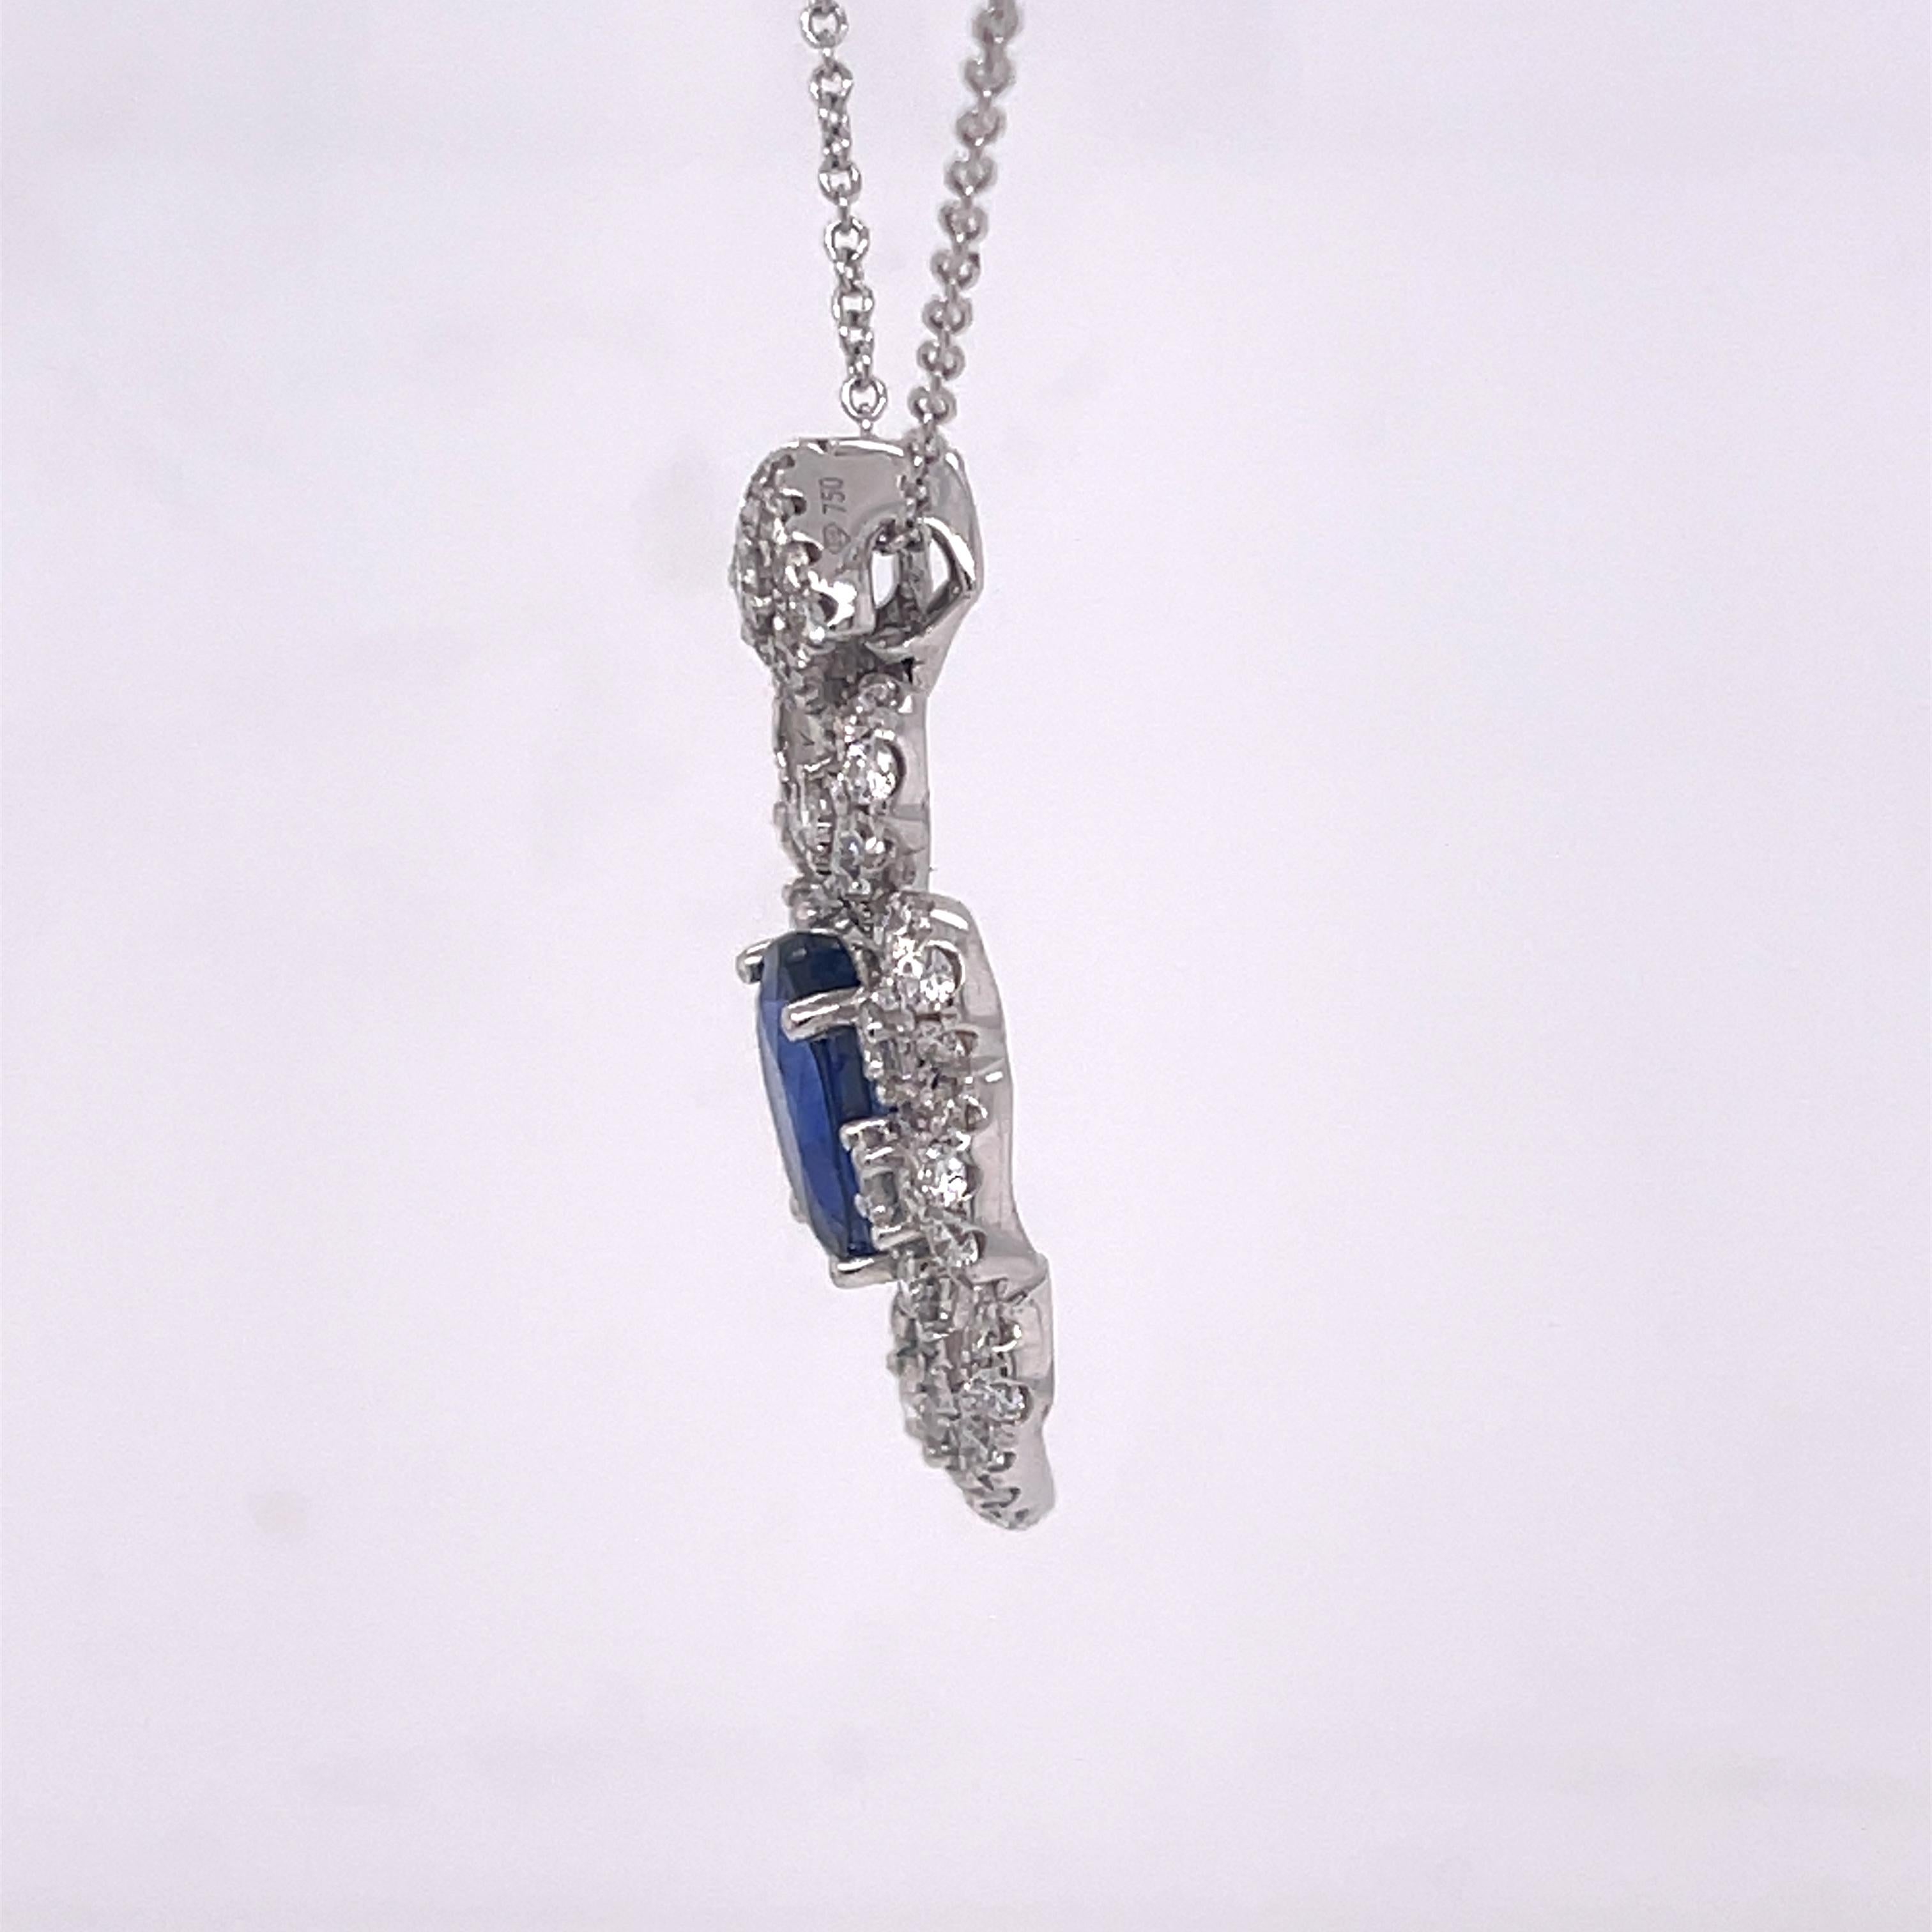 Ornate pendant necklace featuring an oval 3.04ct sapphire and 1.37ctw of diamonds. Set in 18K white gold and on a 18 inch chain. Stamped 18K 750 D1.37 S3.04. Pendant measures 1.25